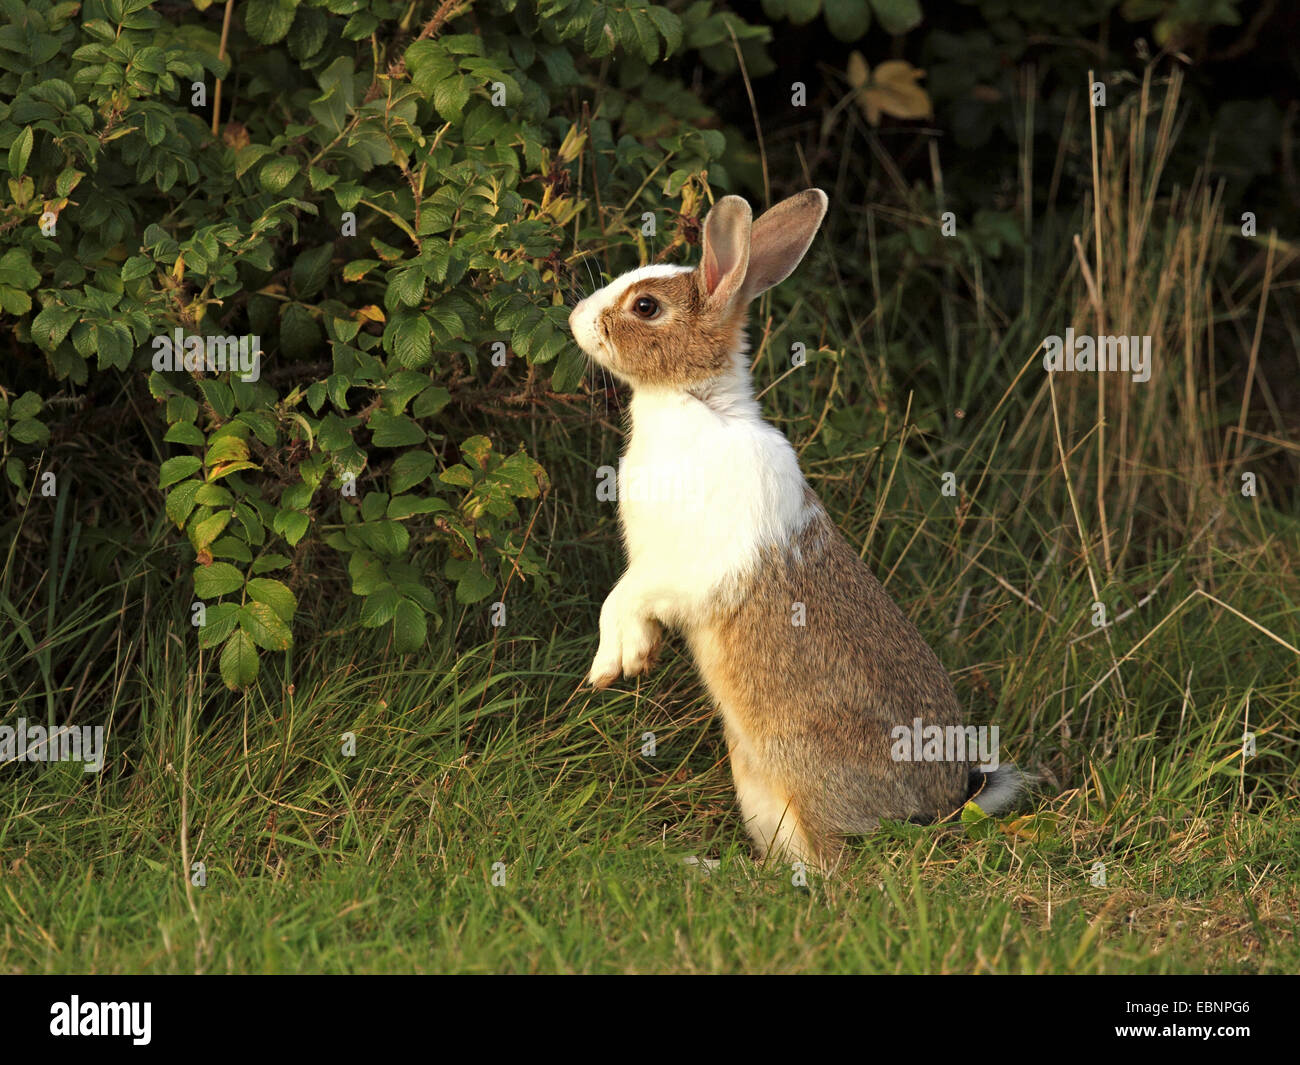 European rabbit (Oryctolagus cuniculus), in the garden, with partly white fur, Germany, Schleswig-Holstein, Sylt Stock Photo